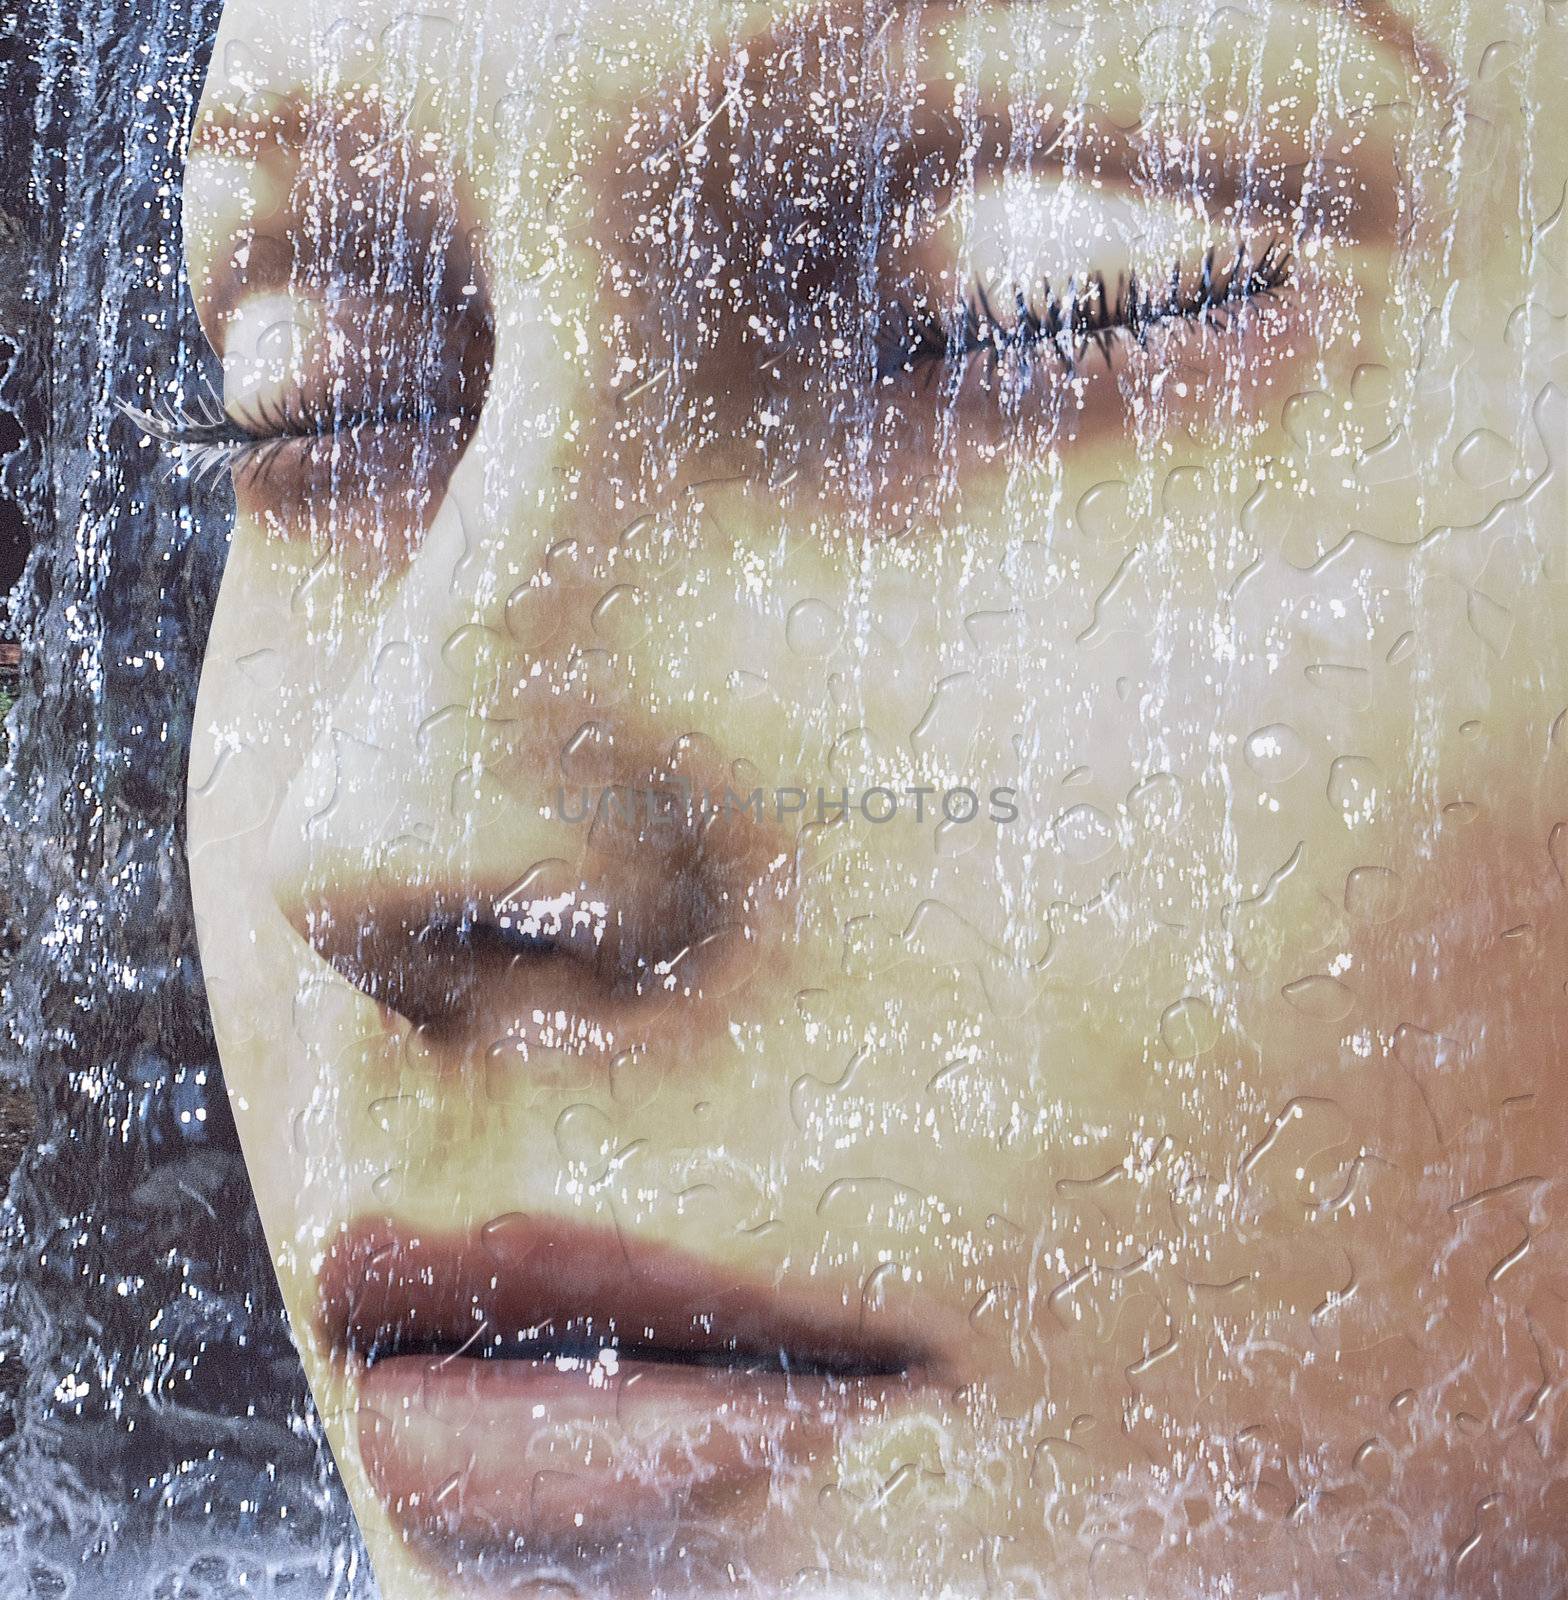 Digital composition of a female face / one of four elements: water